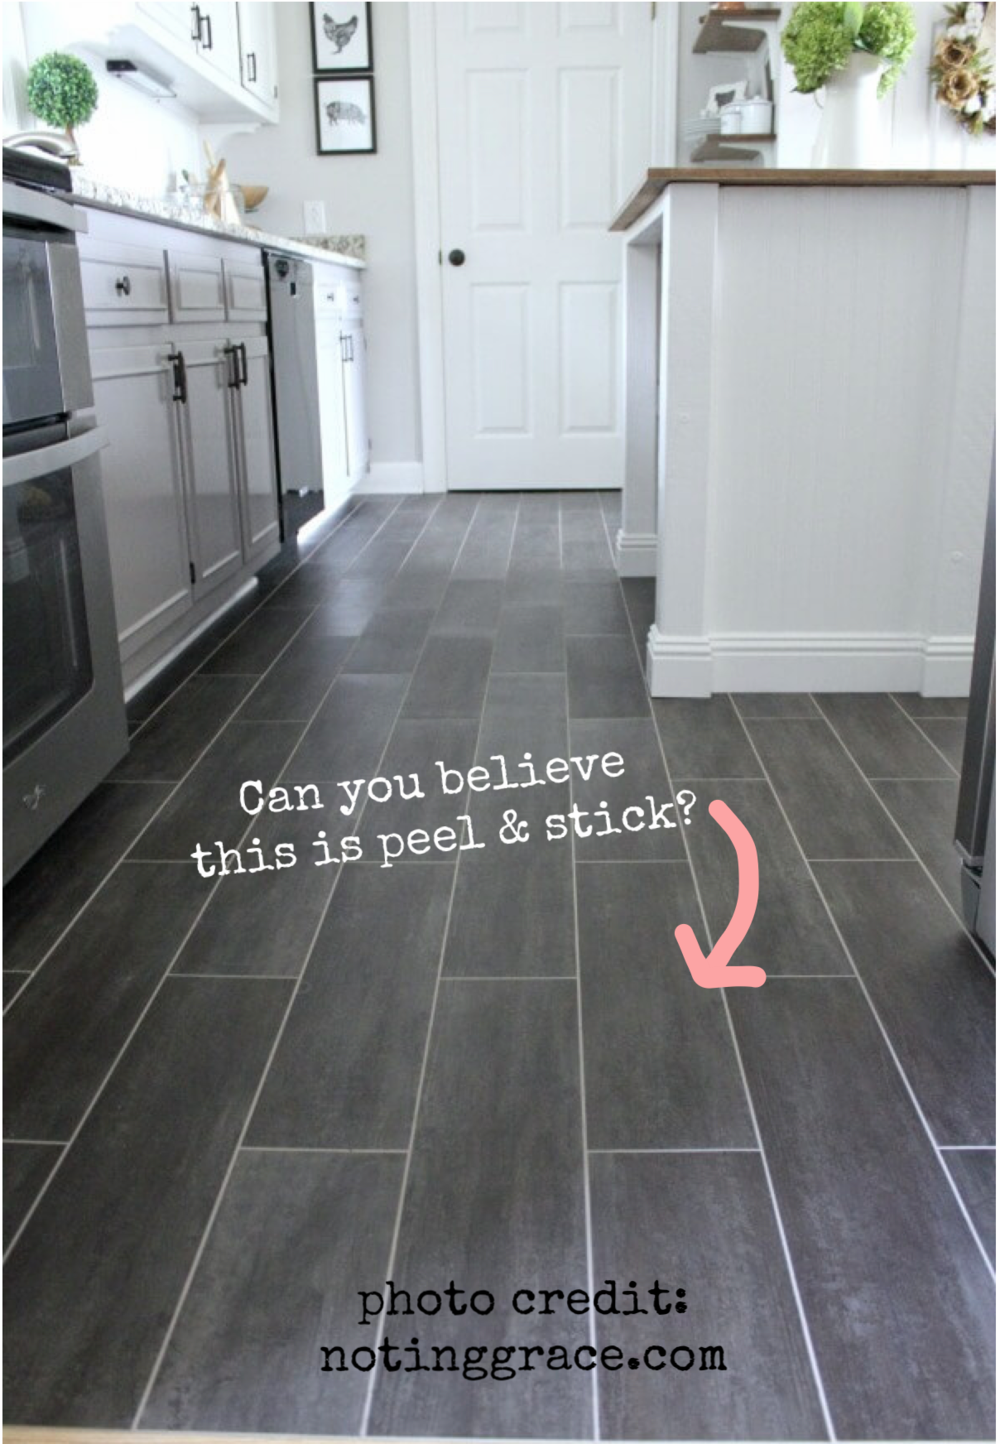 Ideas For Covering Up Tile Floors, What Flooring Can I Lay Over Ceramic Tiles